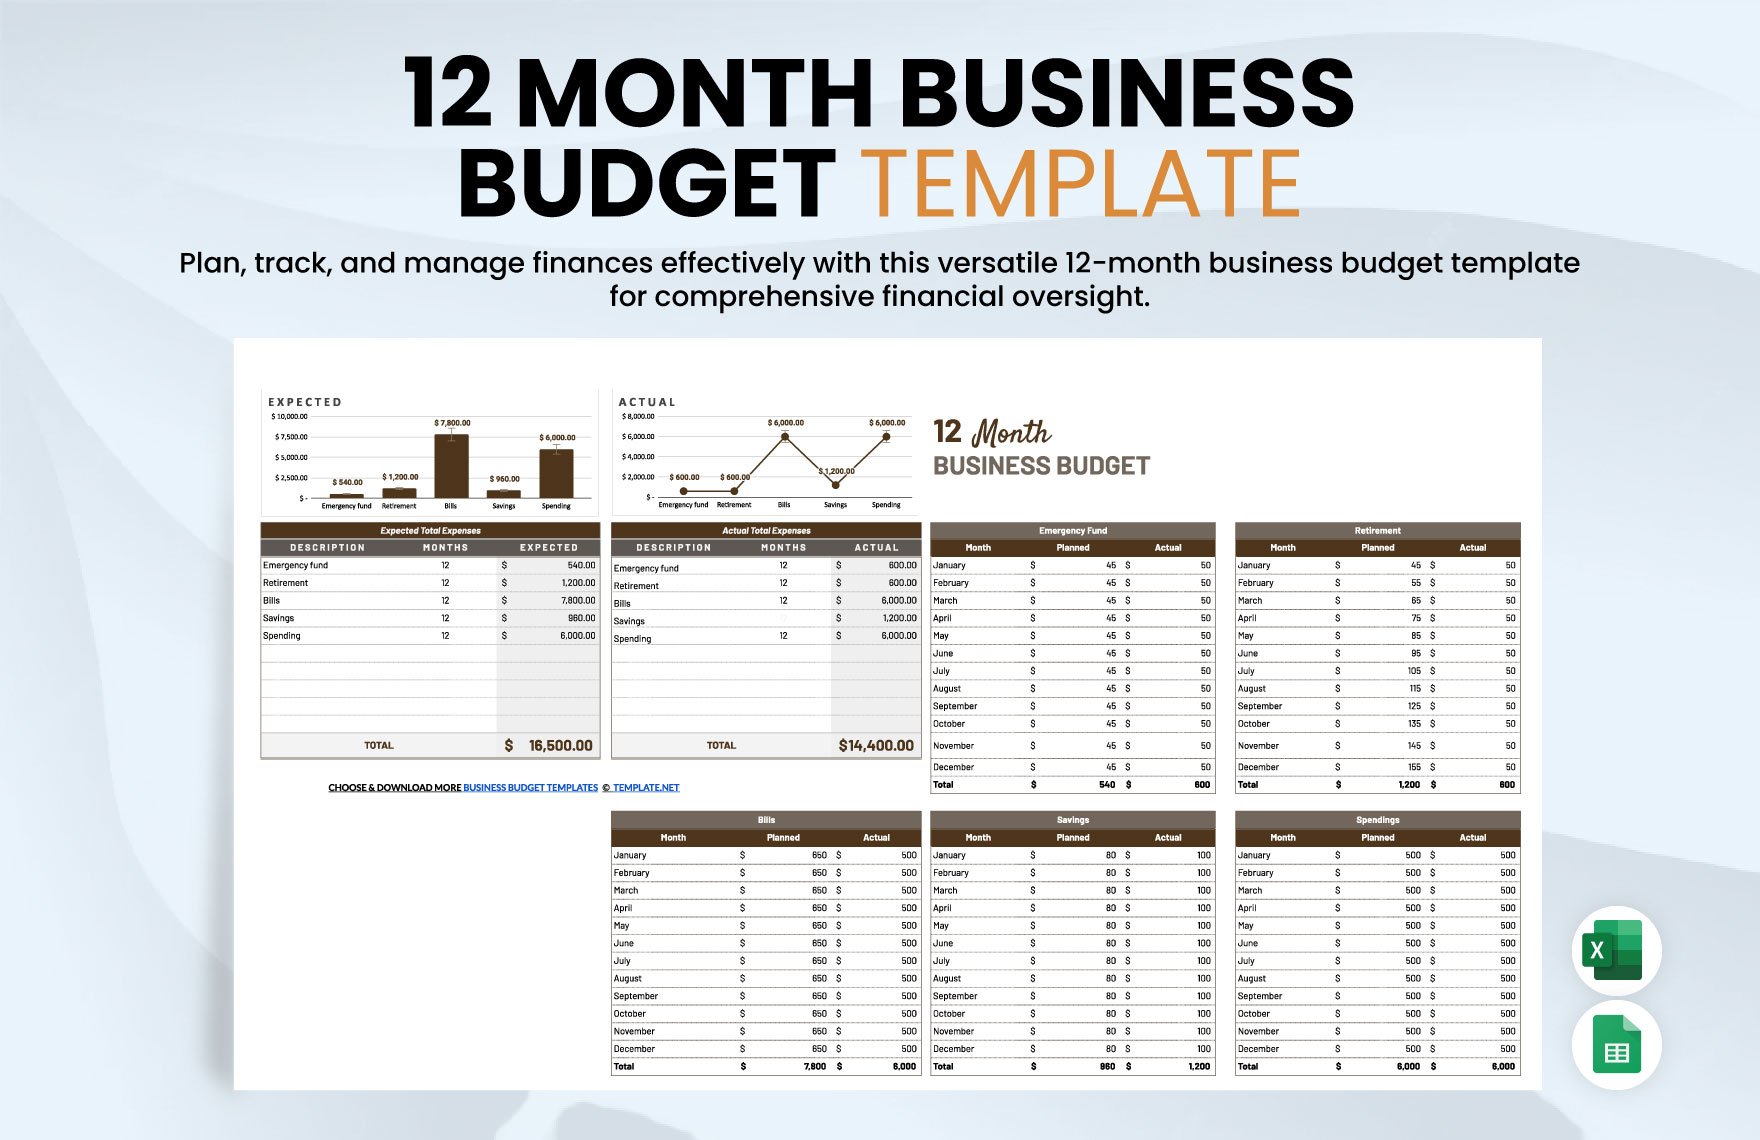 Free 12 Month Business Budget Template in Excel, Google Sheets